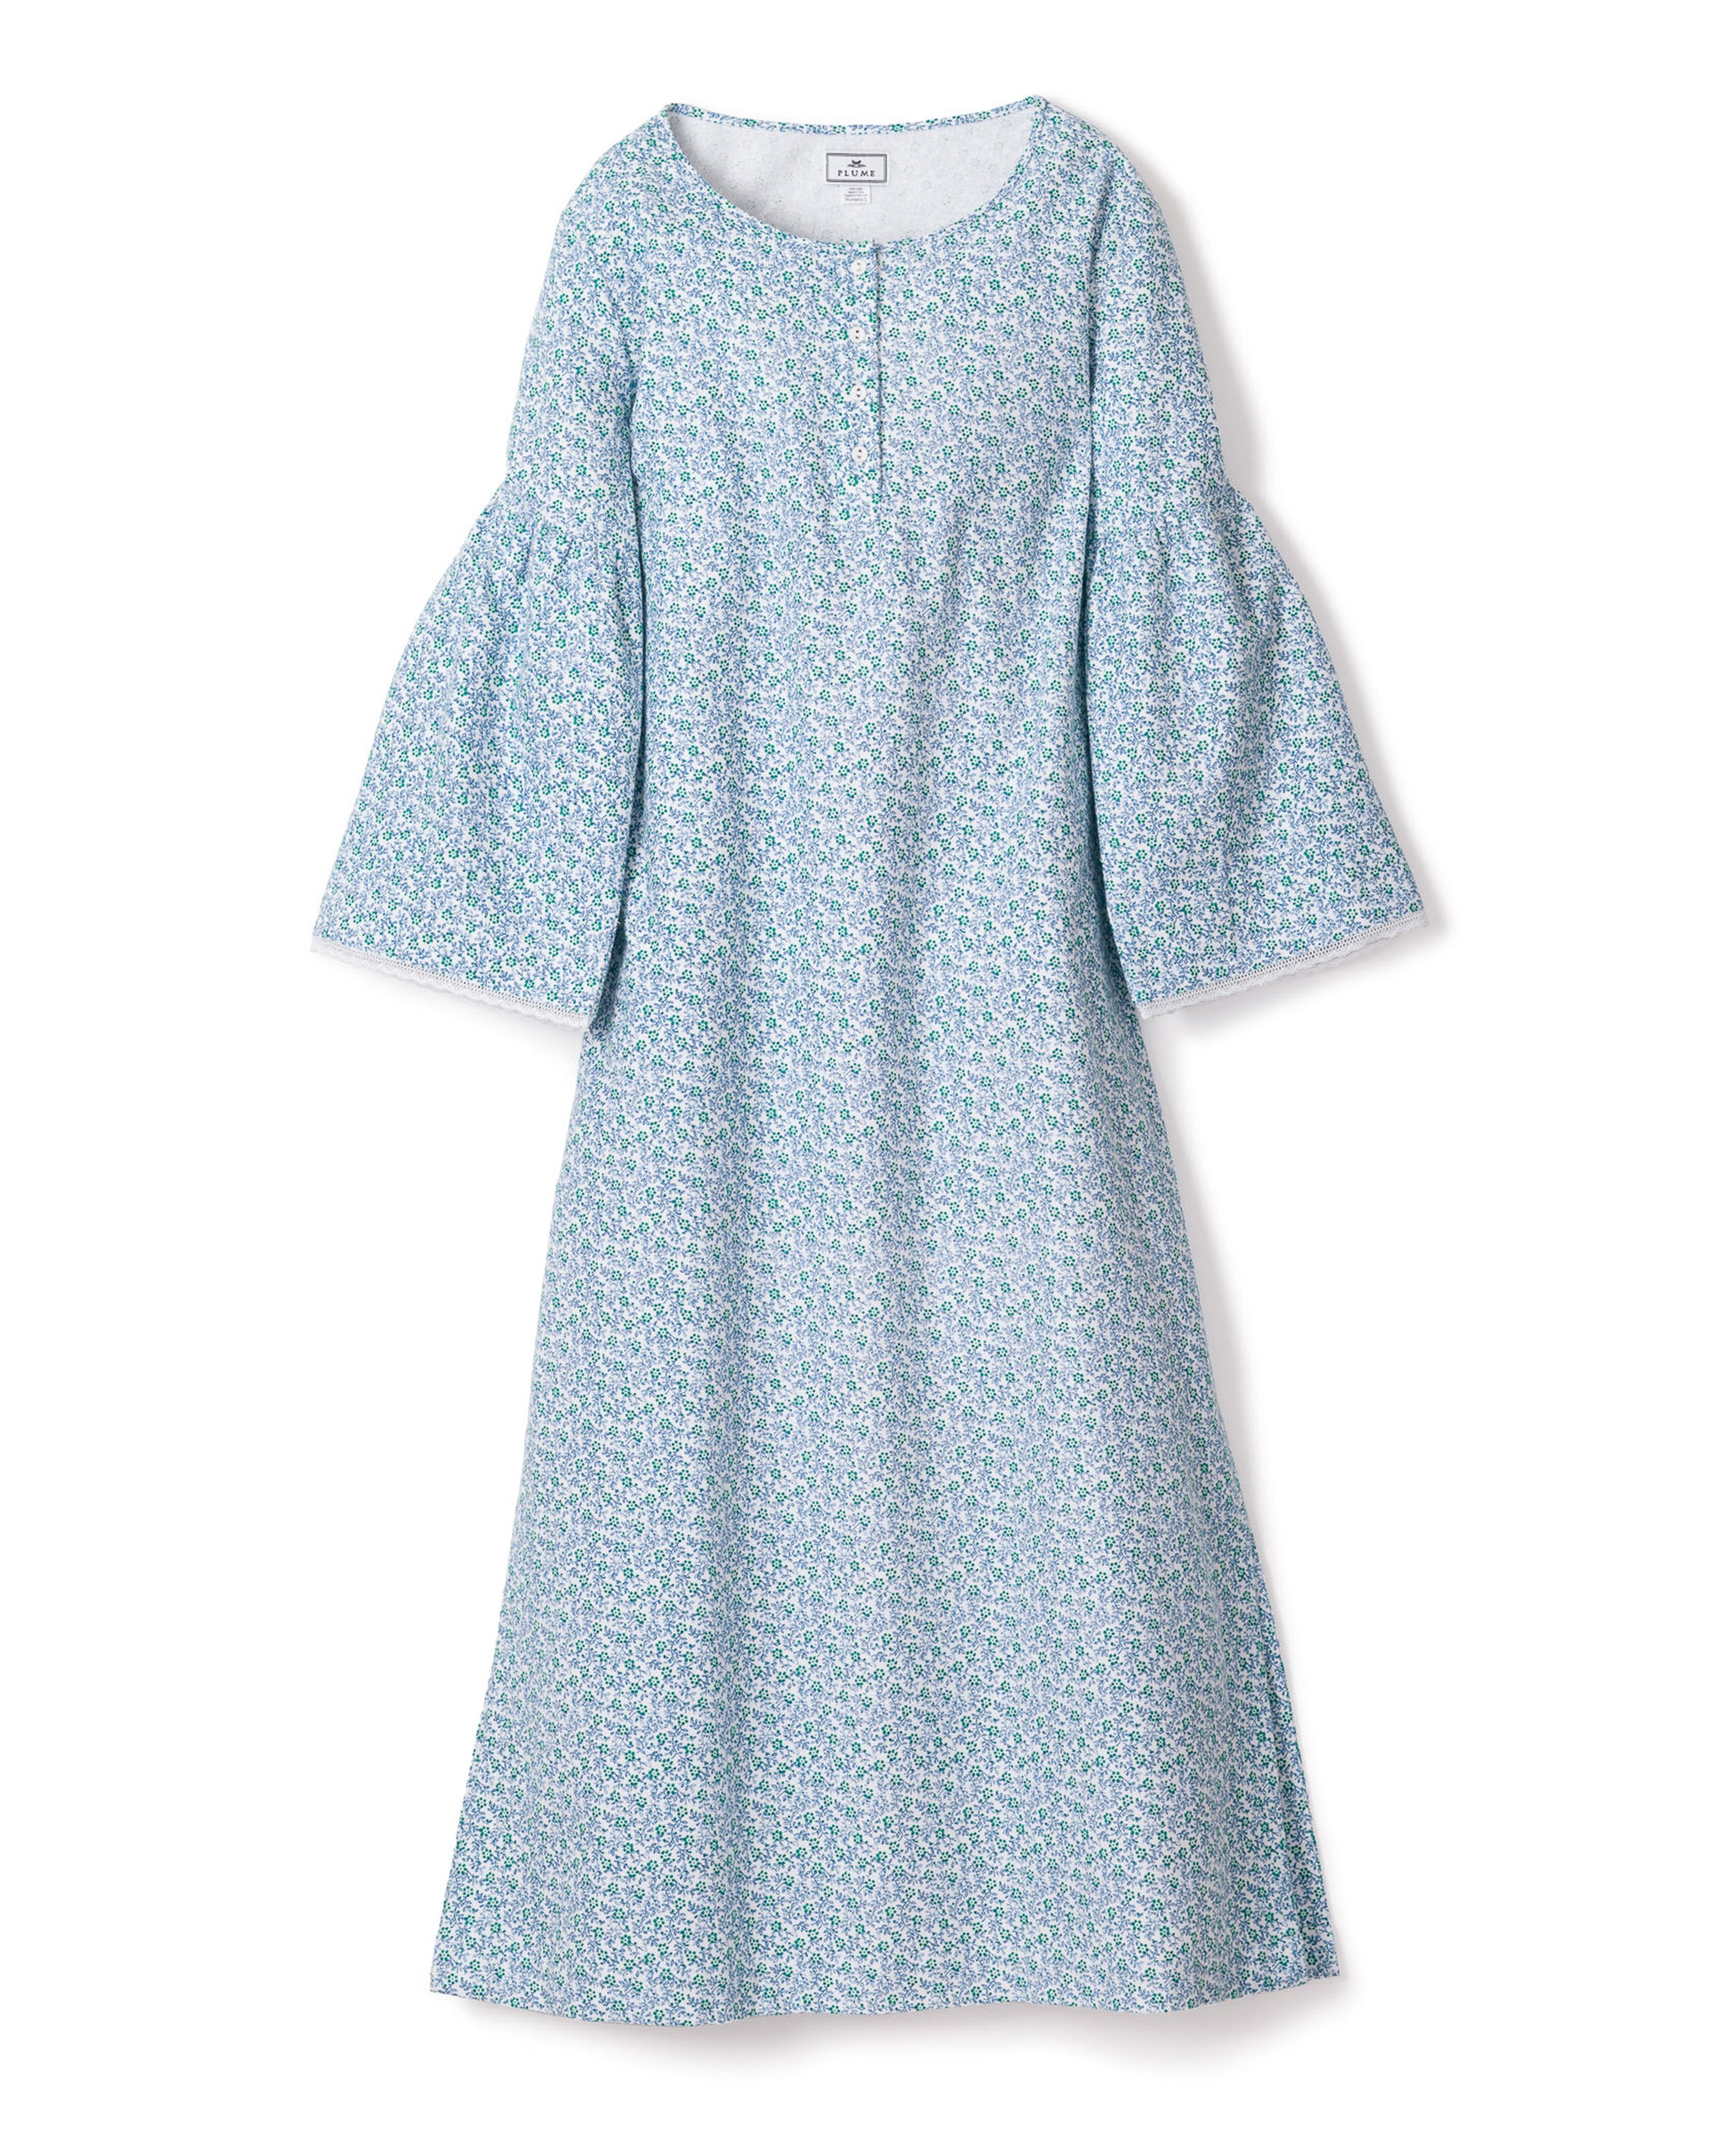 Women's Flannel Seraphine Nightgown in Stafford Floral